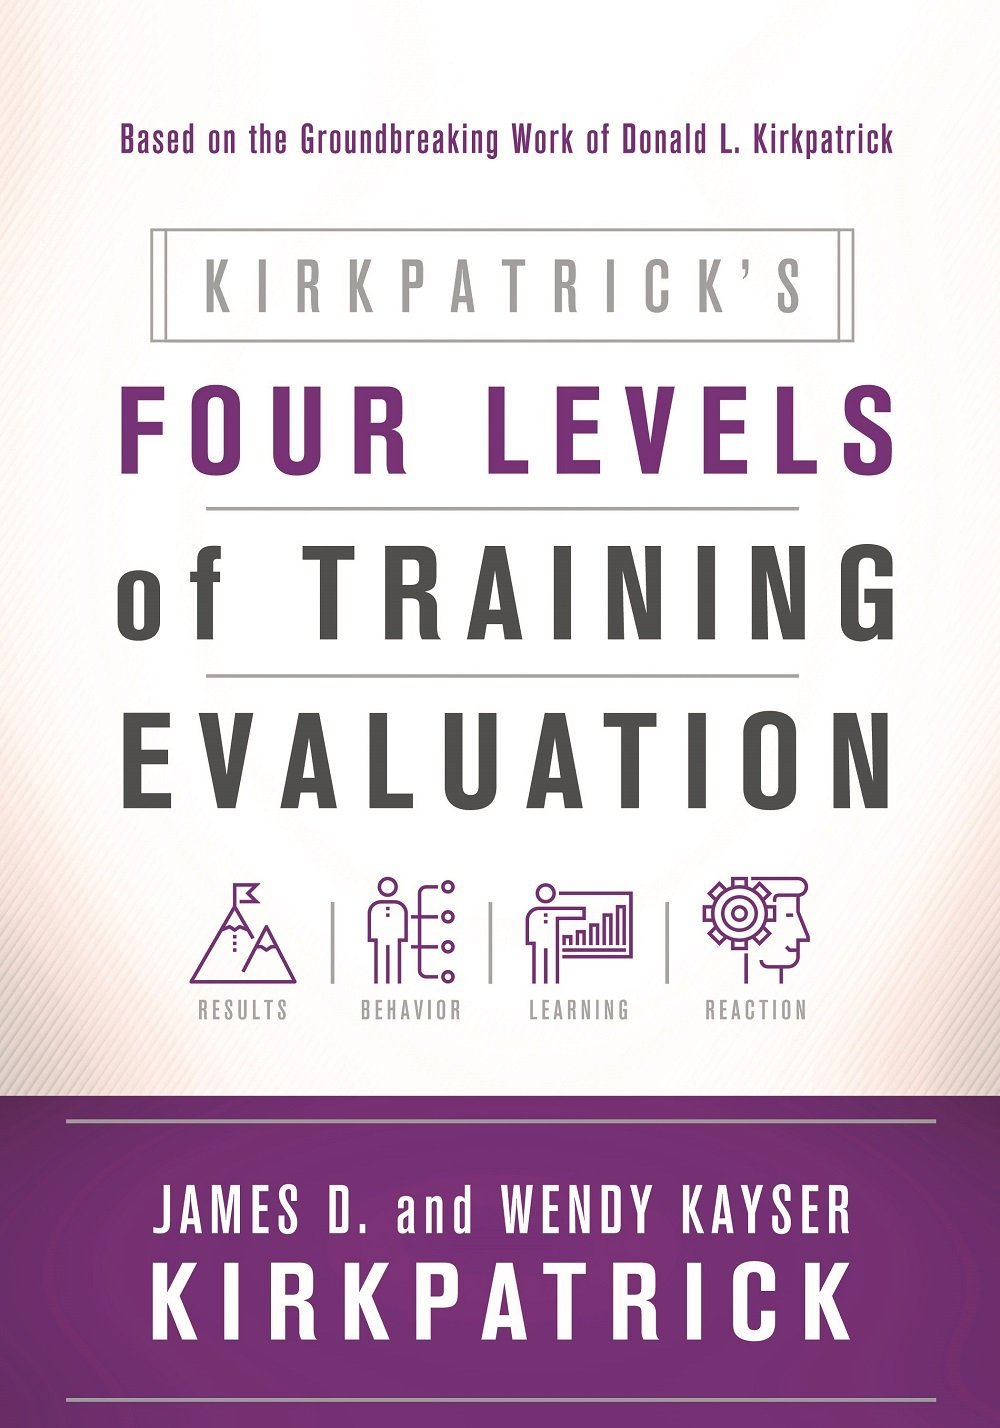 Kirkpatrick's Four Levels of Training Evaluation by James D. and Wendy Kayser Kirkpatrick